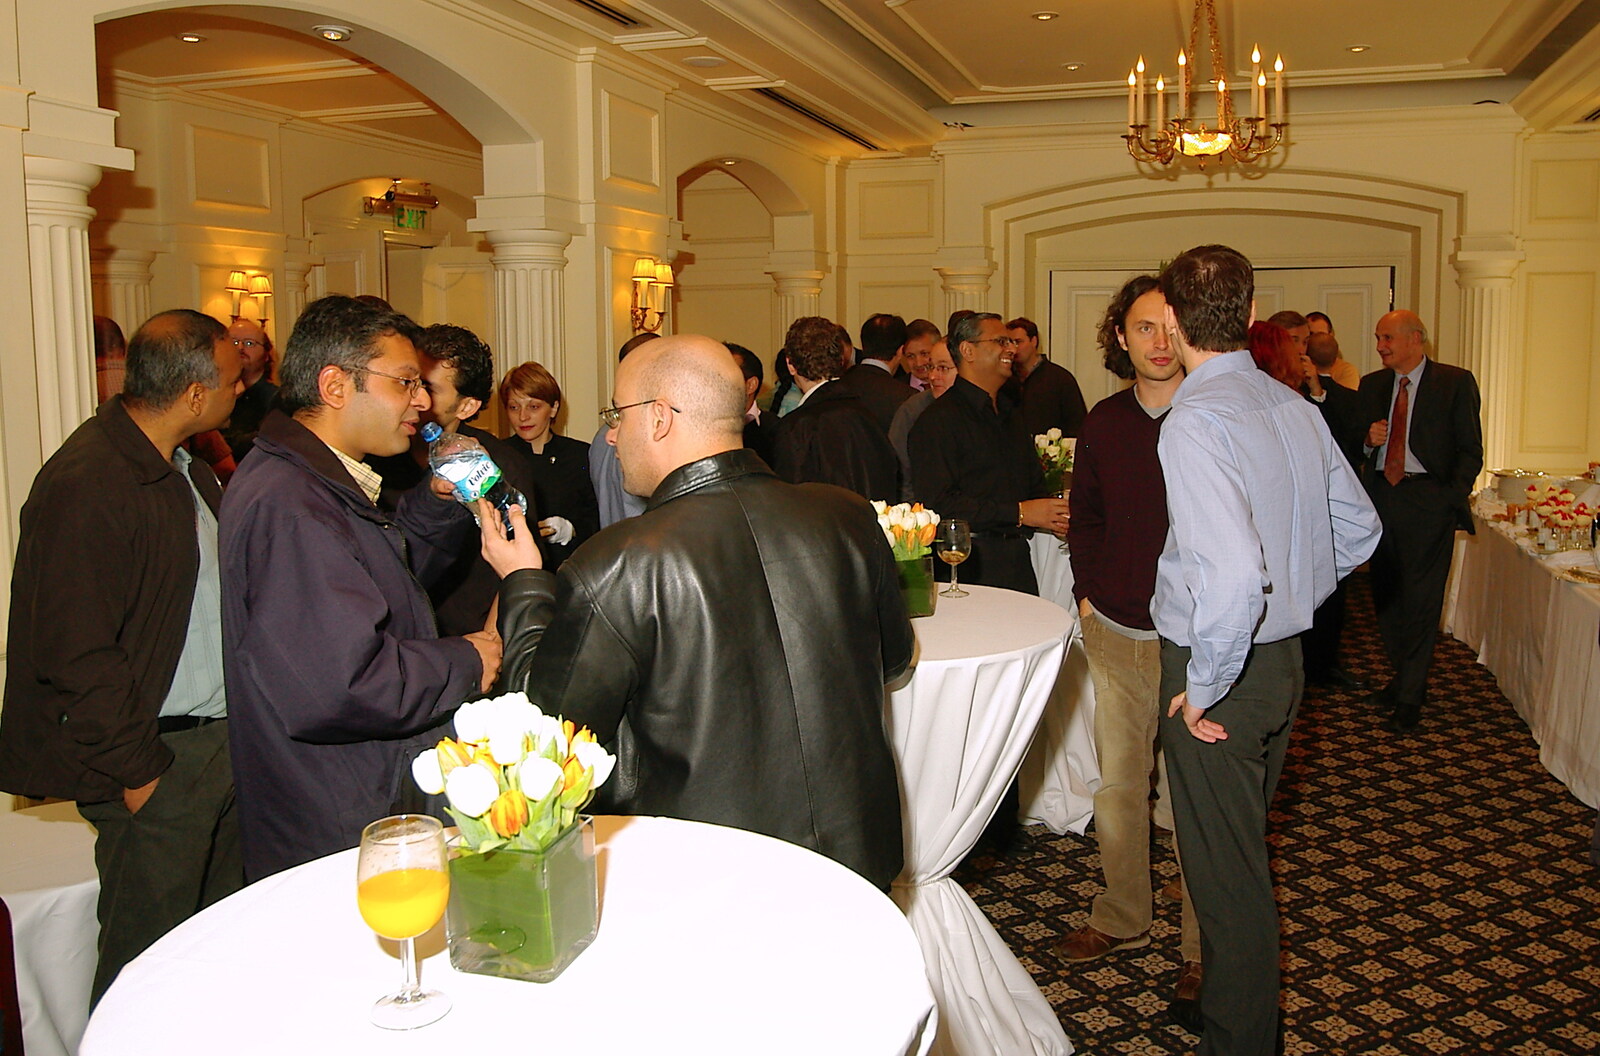 Mingling guests from Qualcomm Europe All-Hands at the Berkeley Hotel, London - 9th November 2005